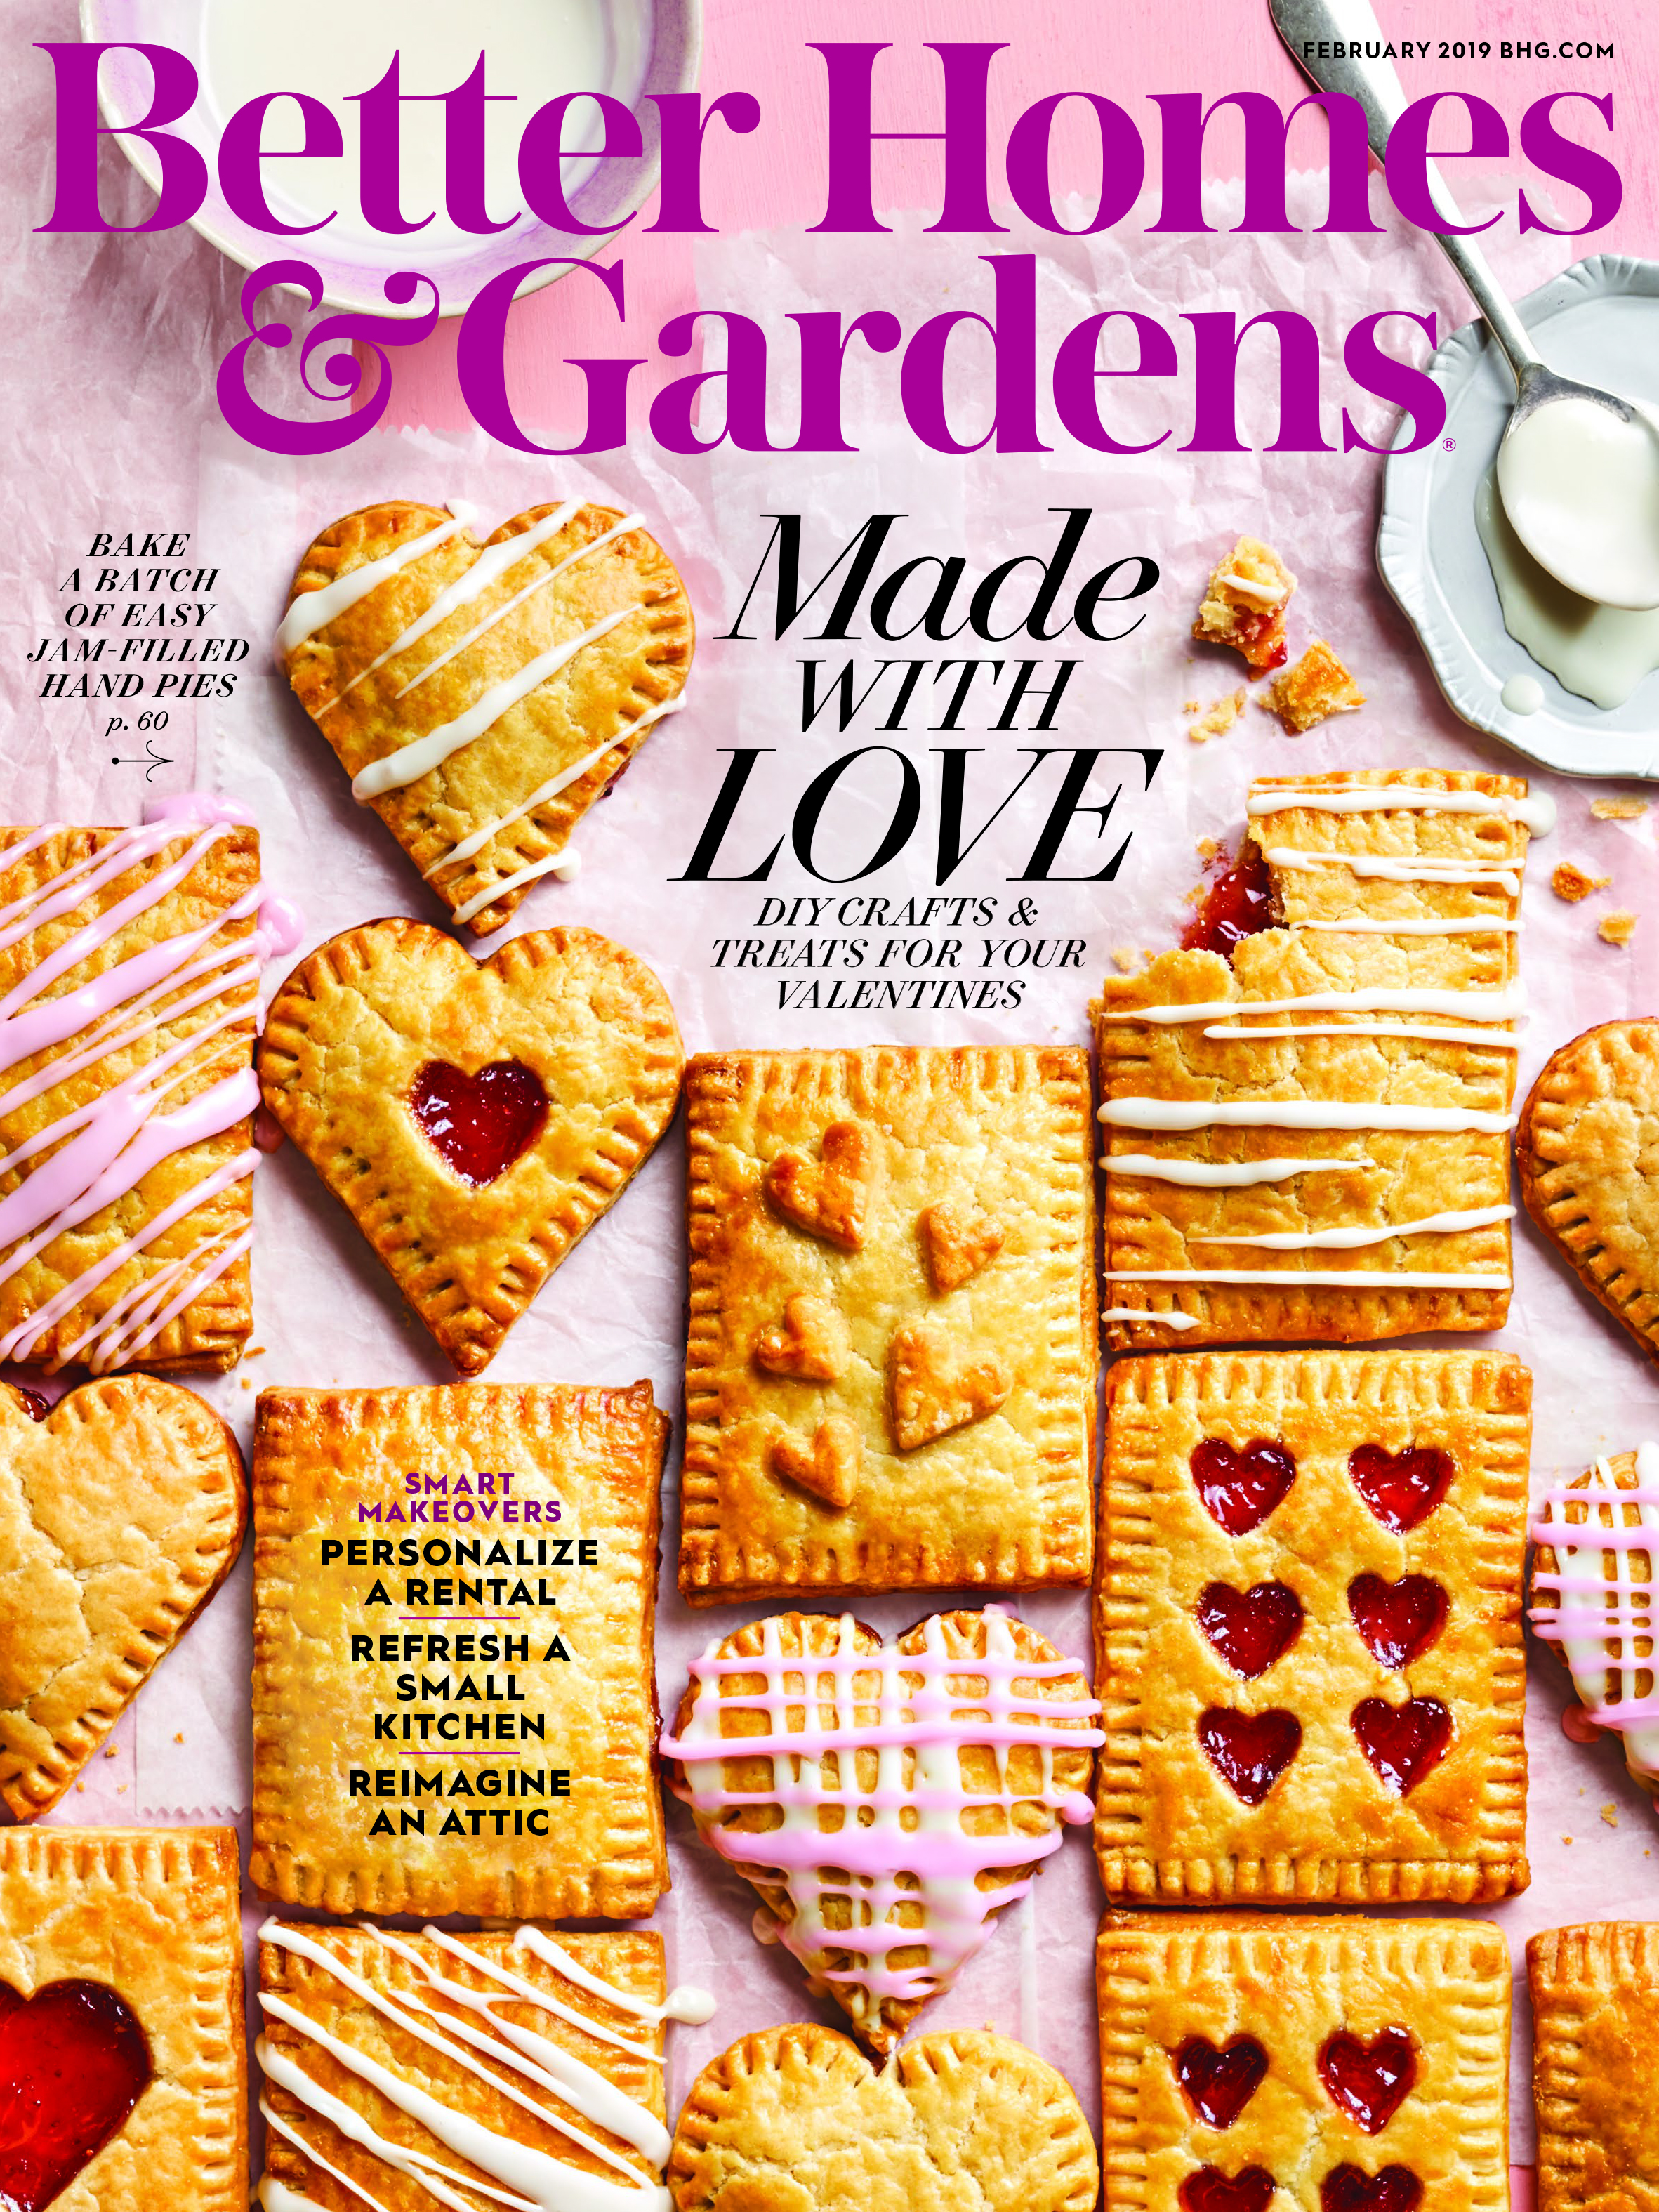 February 2019 Issue - Made With Love